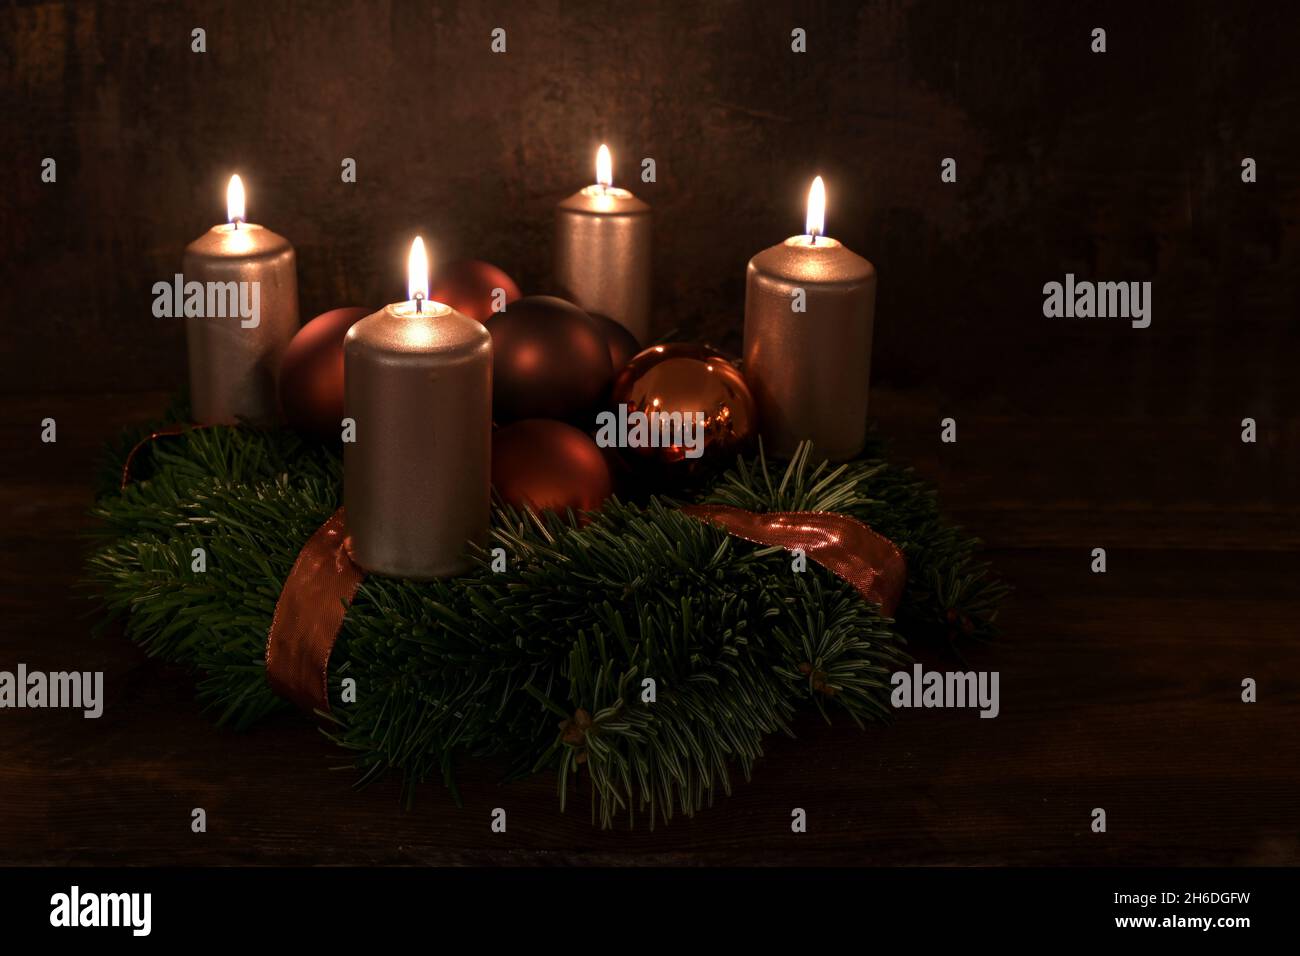 Small Advent wreath with four lit copper colored candles and Christmas decoration baubles against a dark brown rustic background, copy space, selected Stock Photo